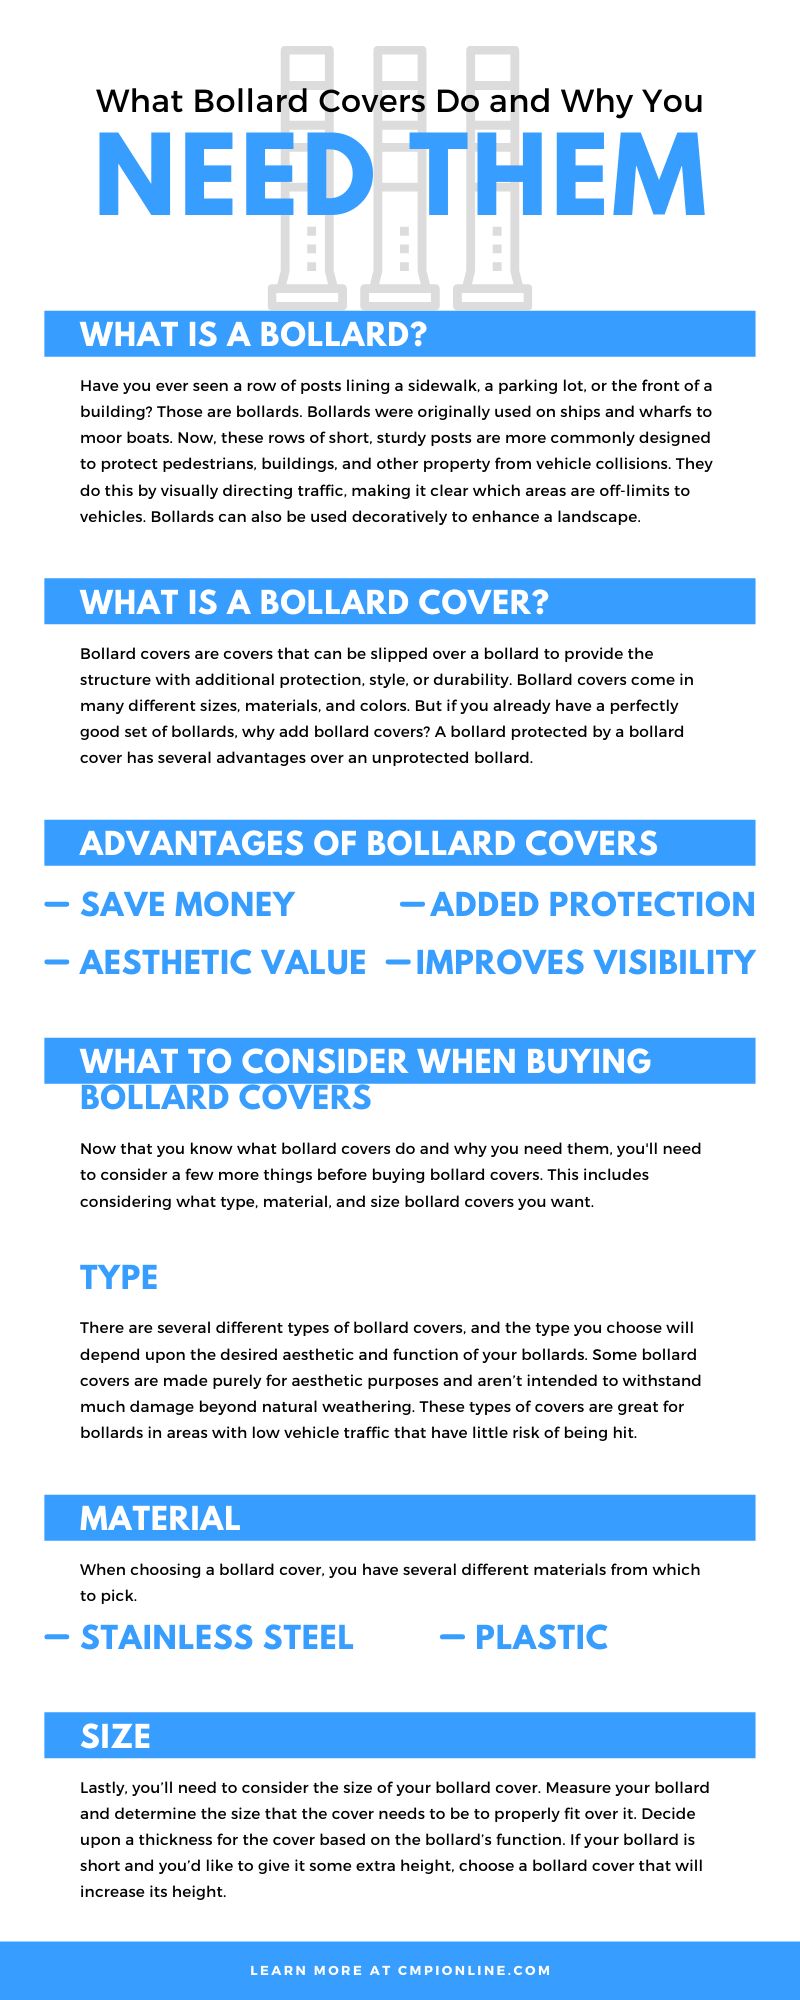 What Bollard Covers Do and Why You Need Them